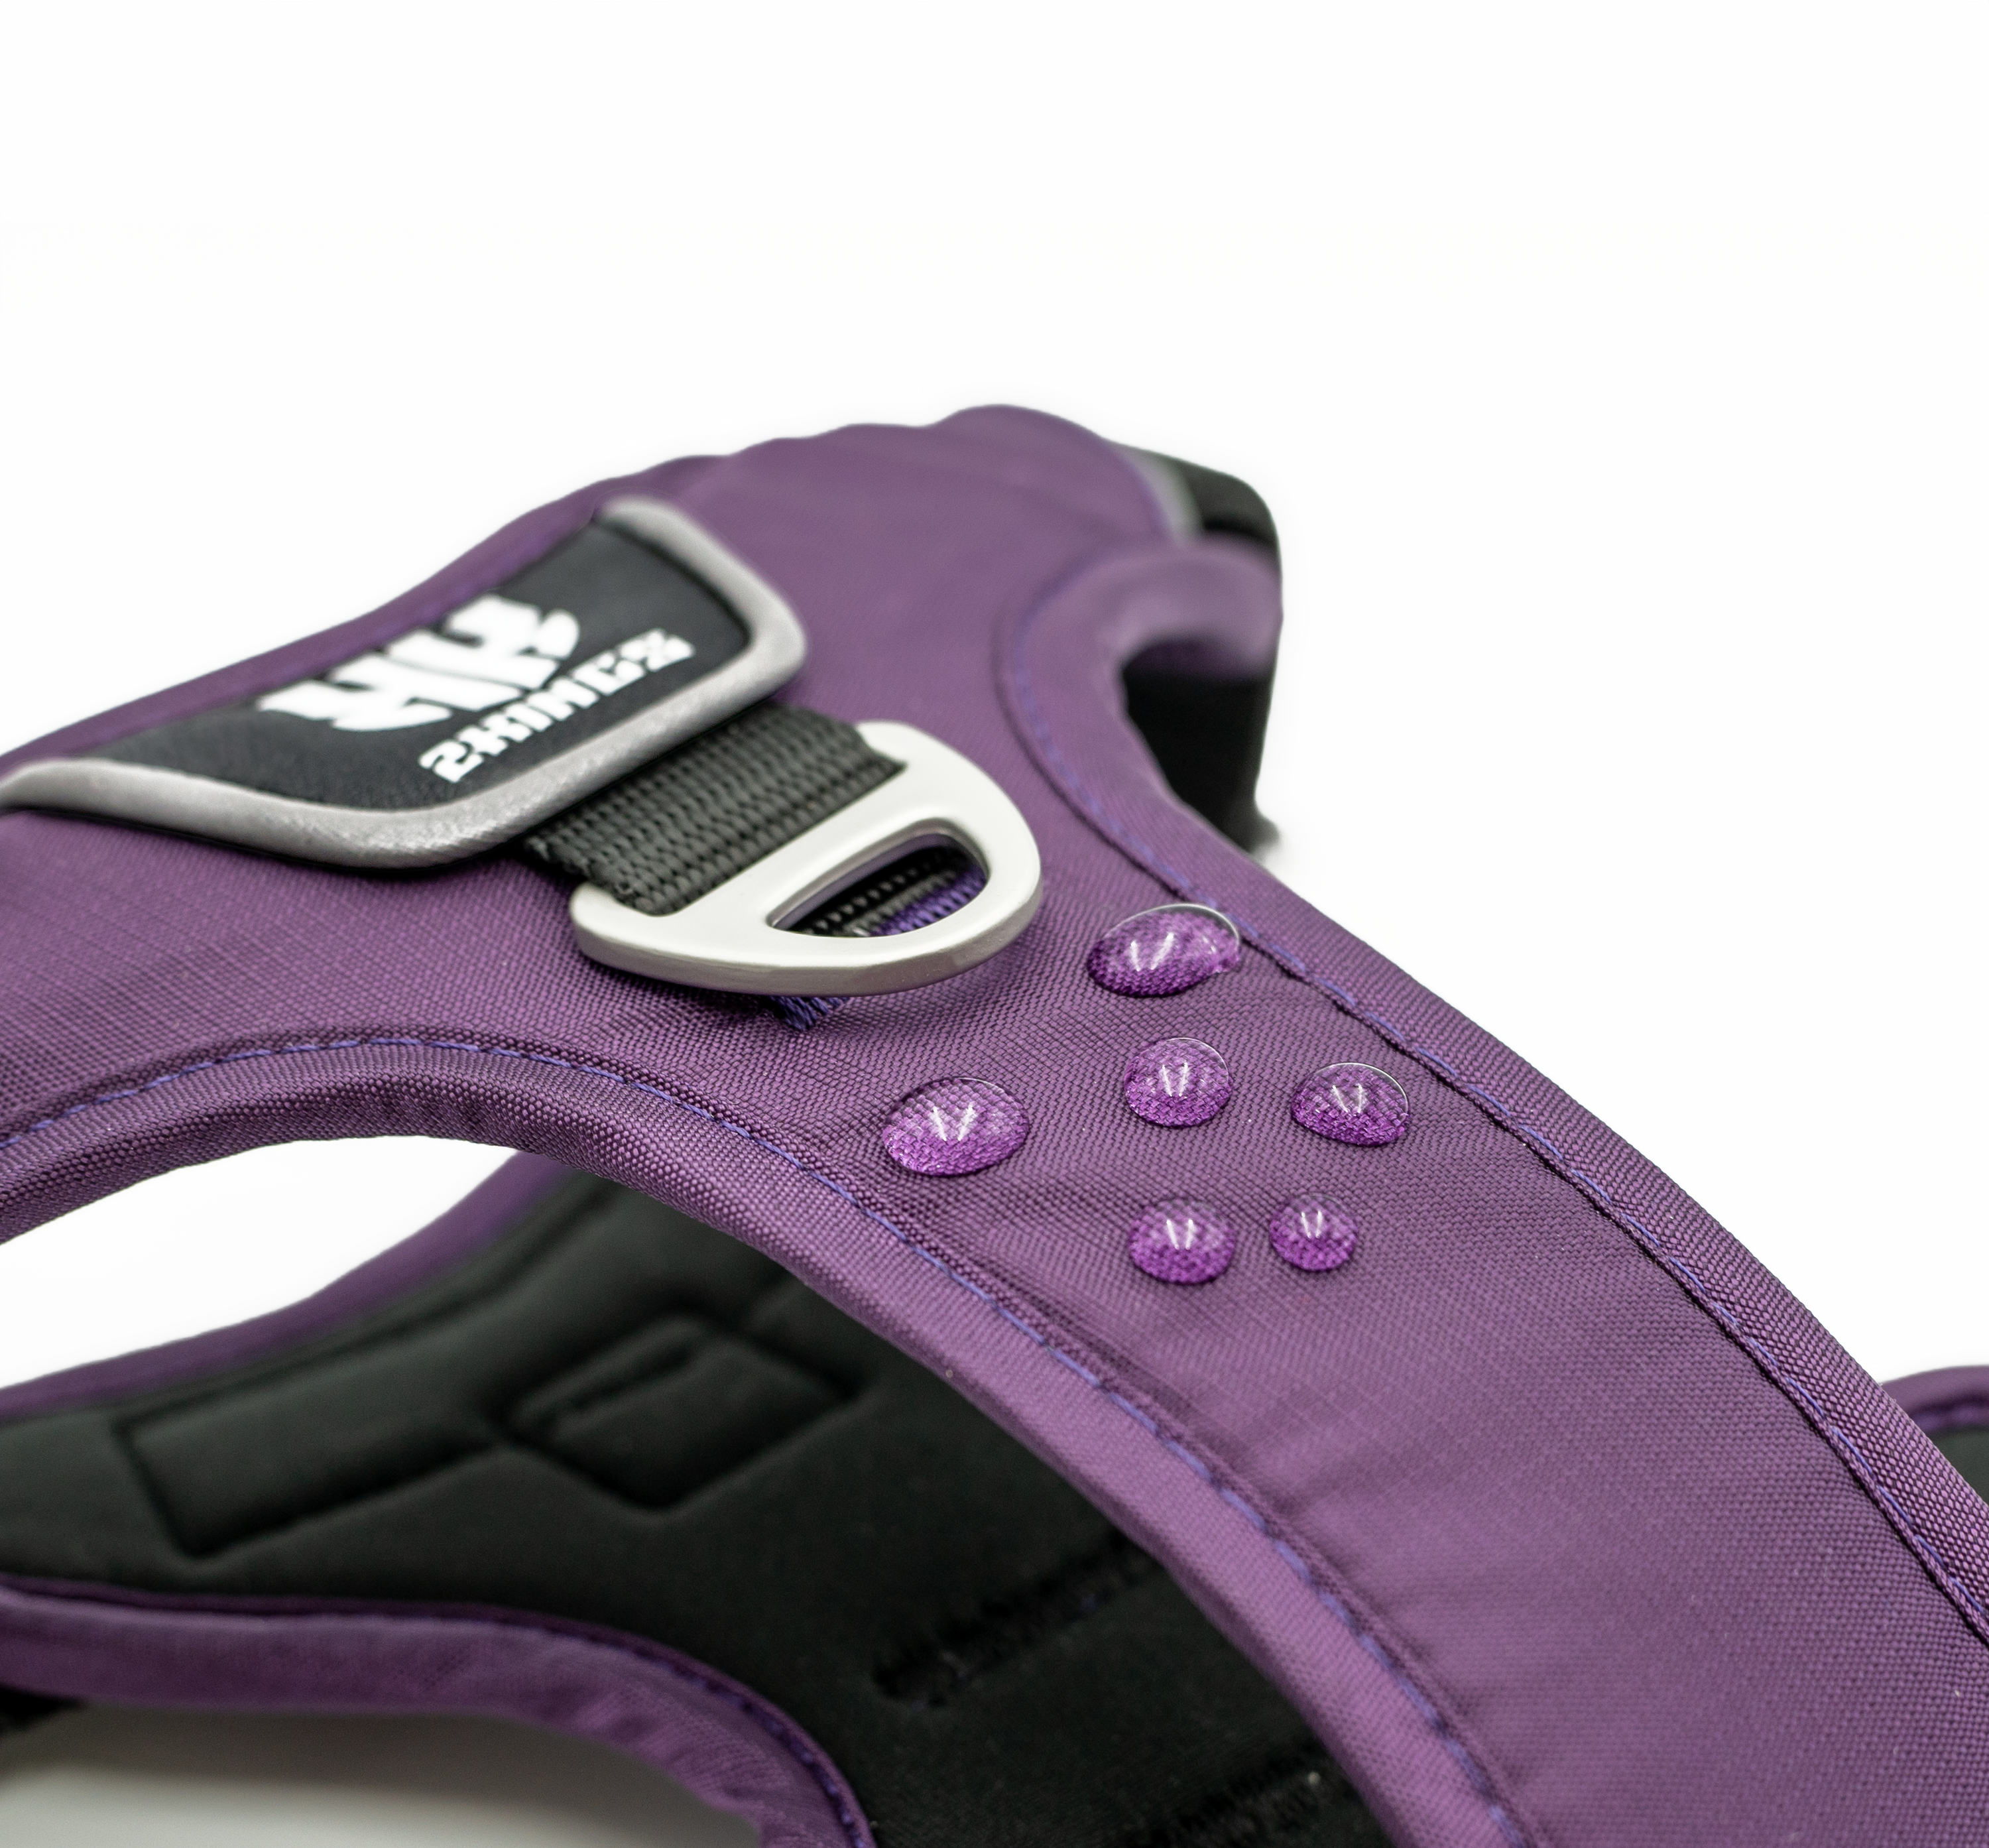 Comfort Dog Harness & Double Grip Lead Set - Padded & Waterproof with Top Handle - Purple.